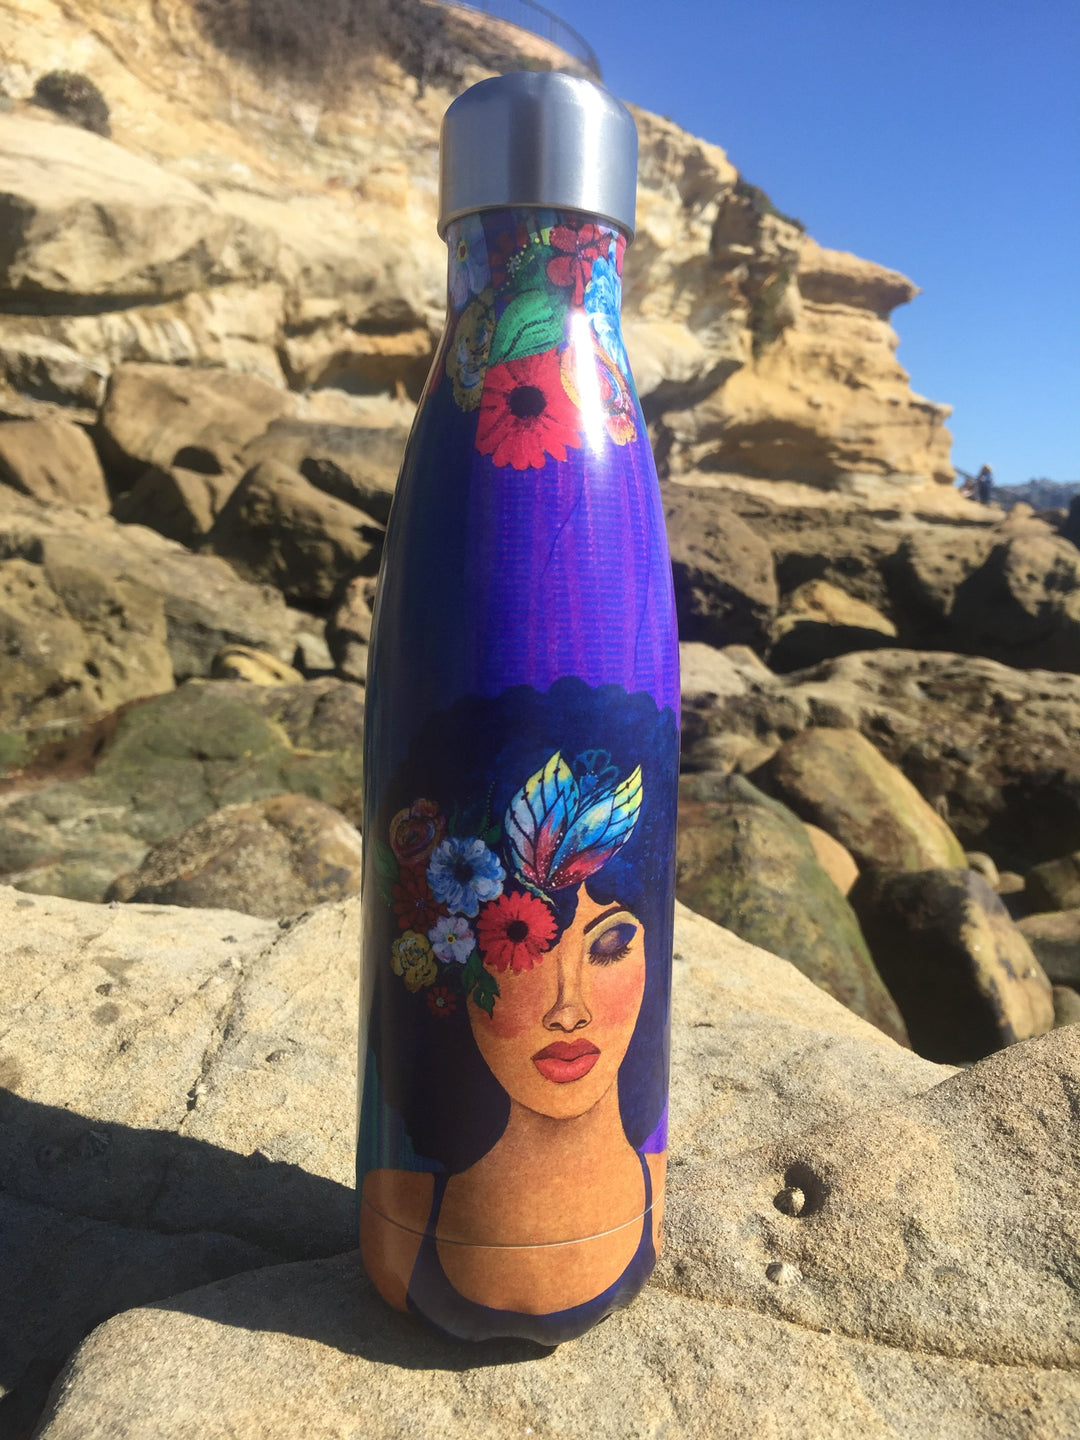 Believe, Blossom and Become: African American Stainless Steel Bottle by GBaby